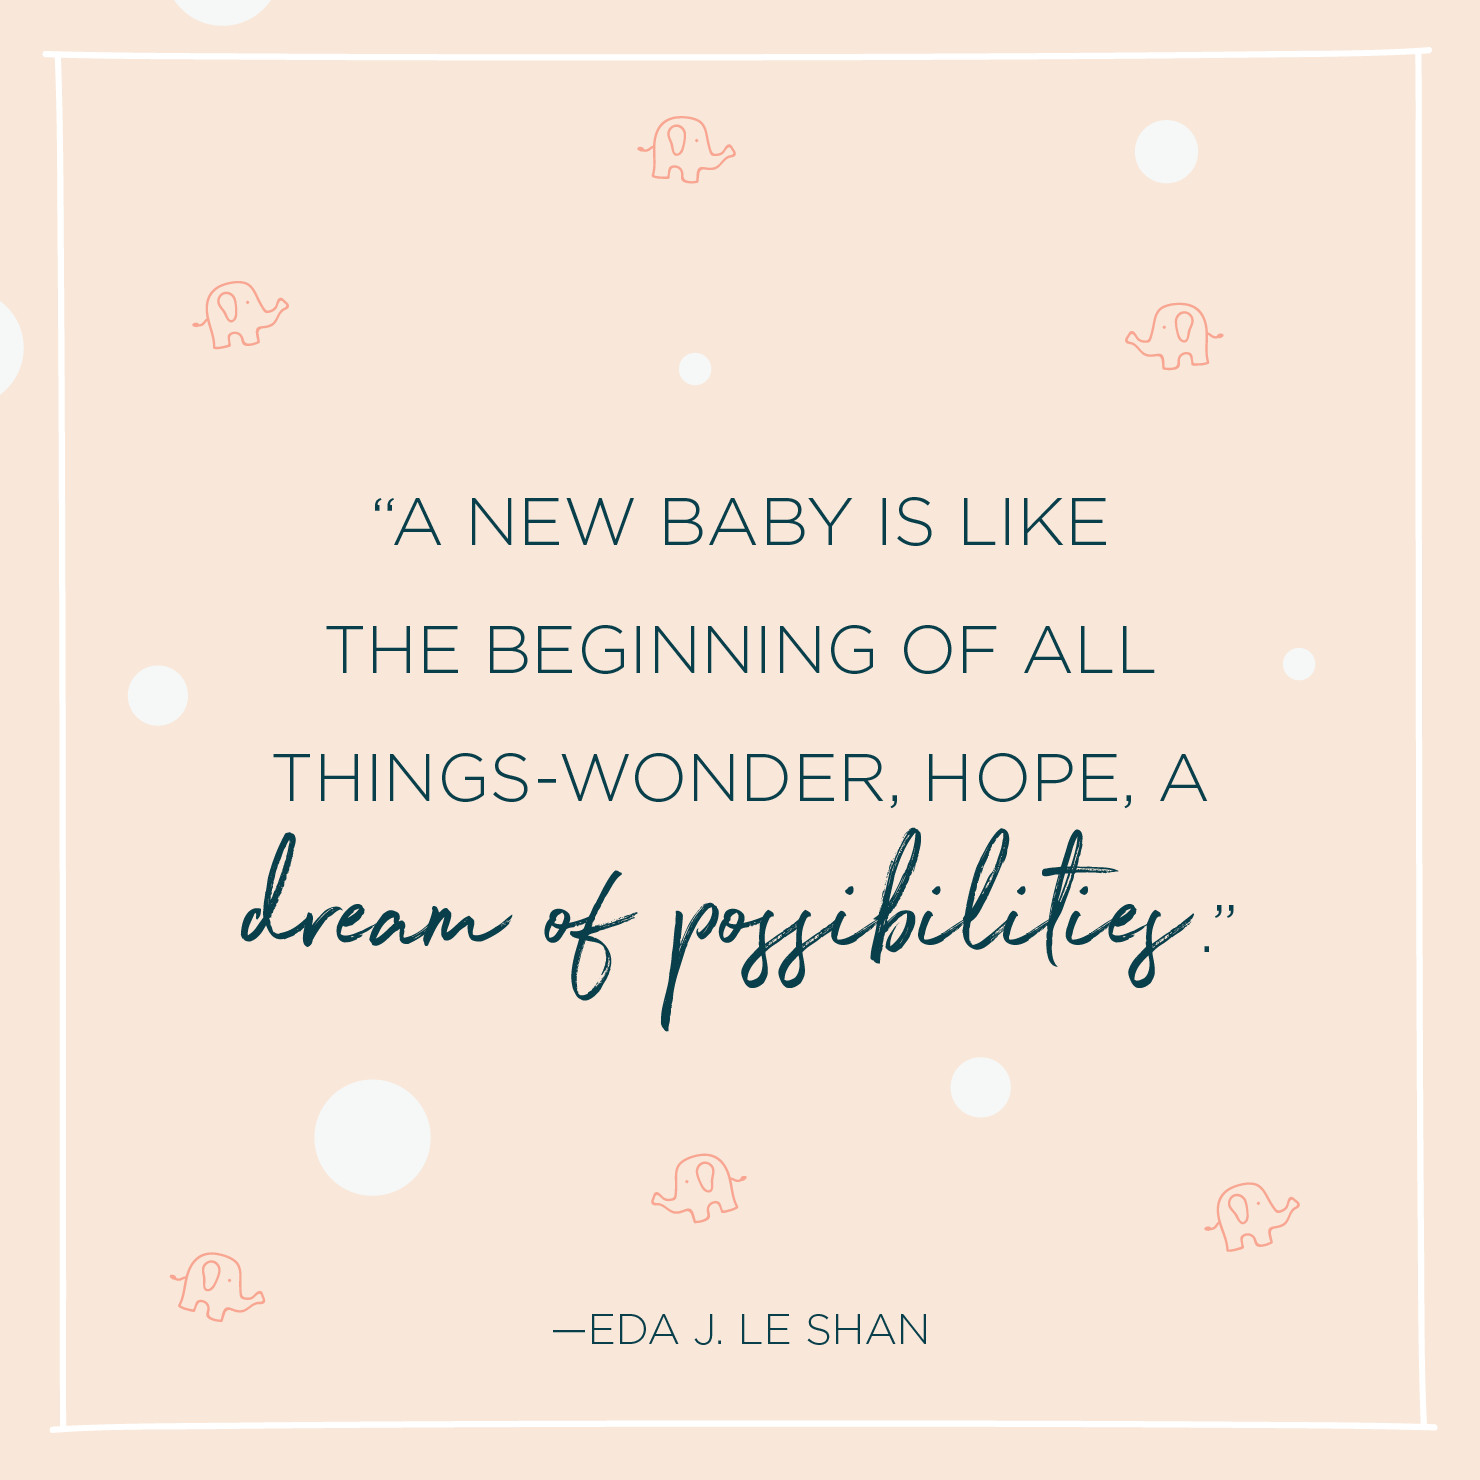 Inspirational Quotes For New Baby
 84 Inspirational Baby Quotes and Sayings